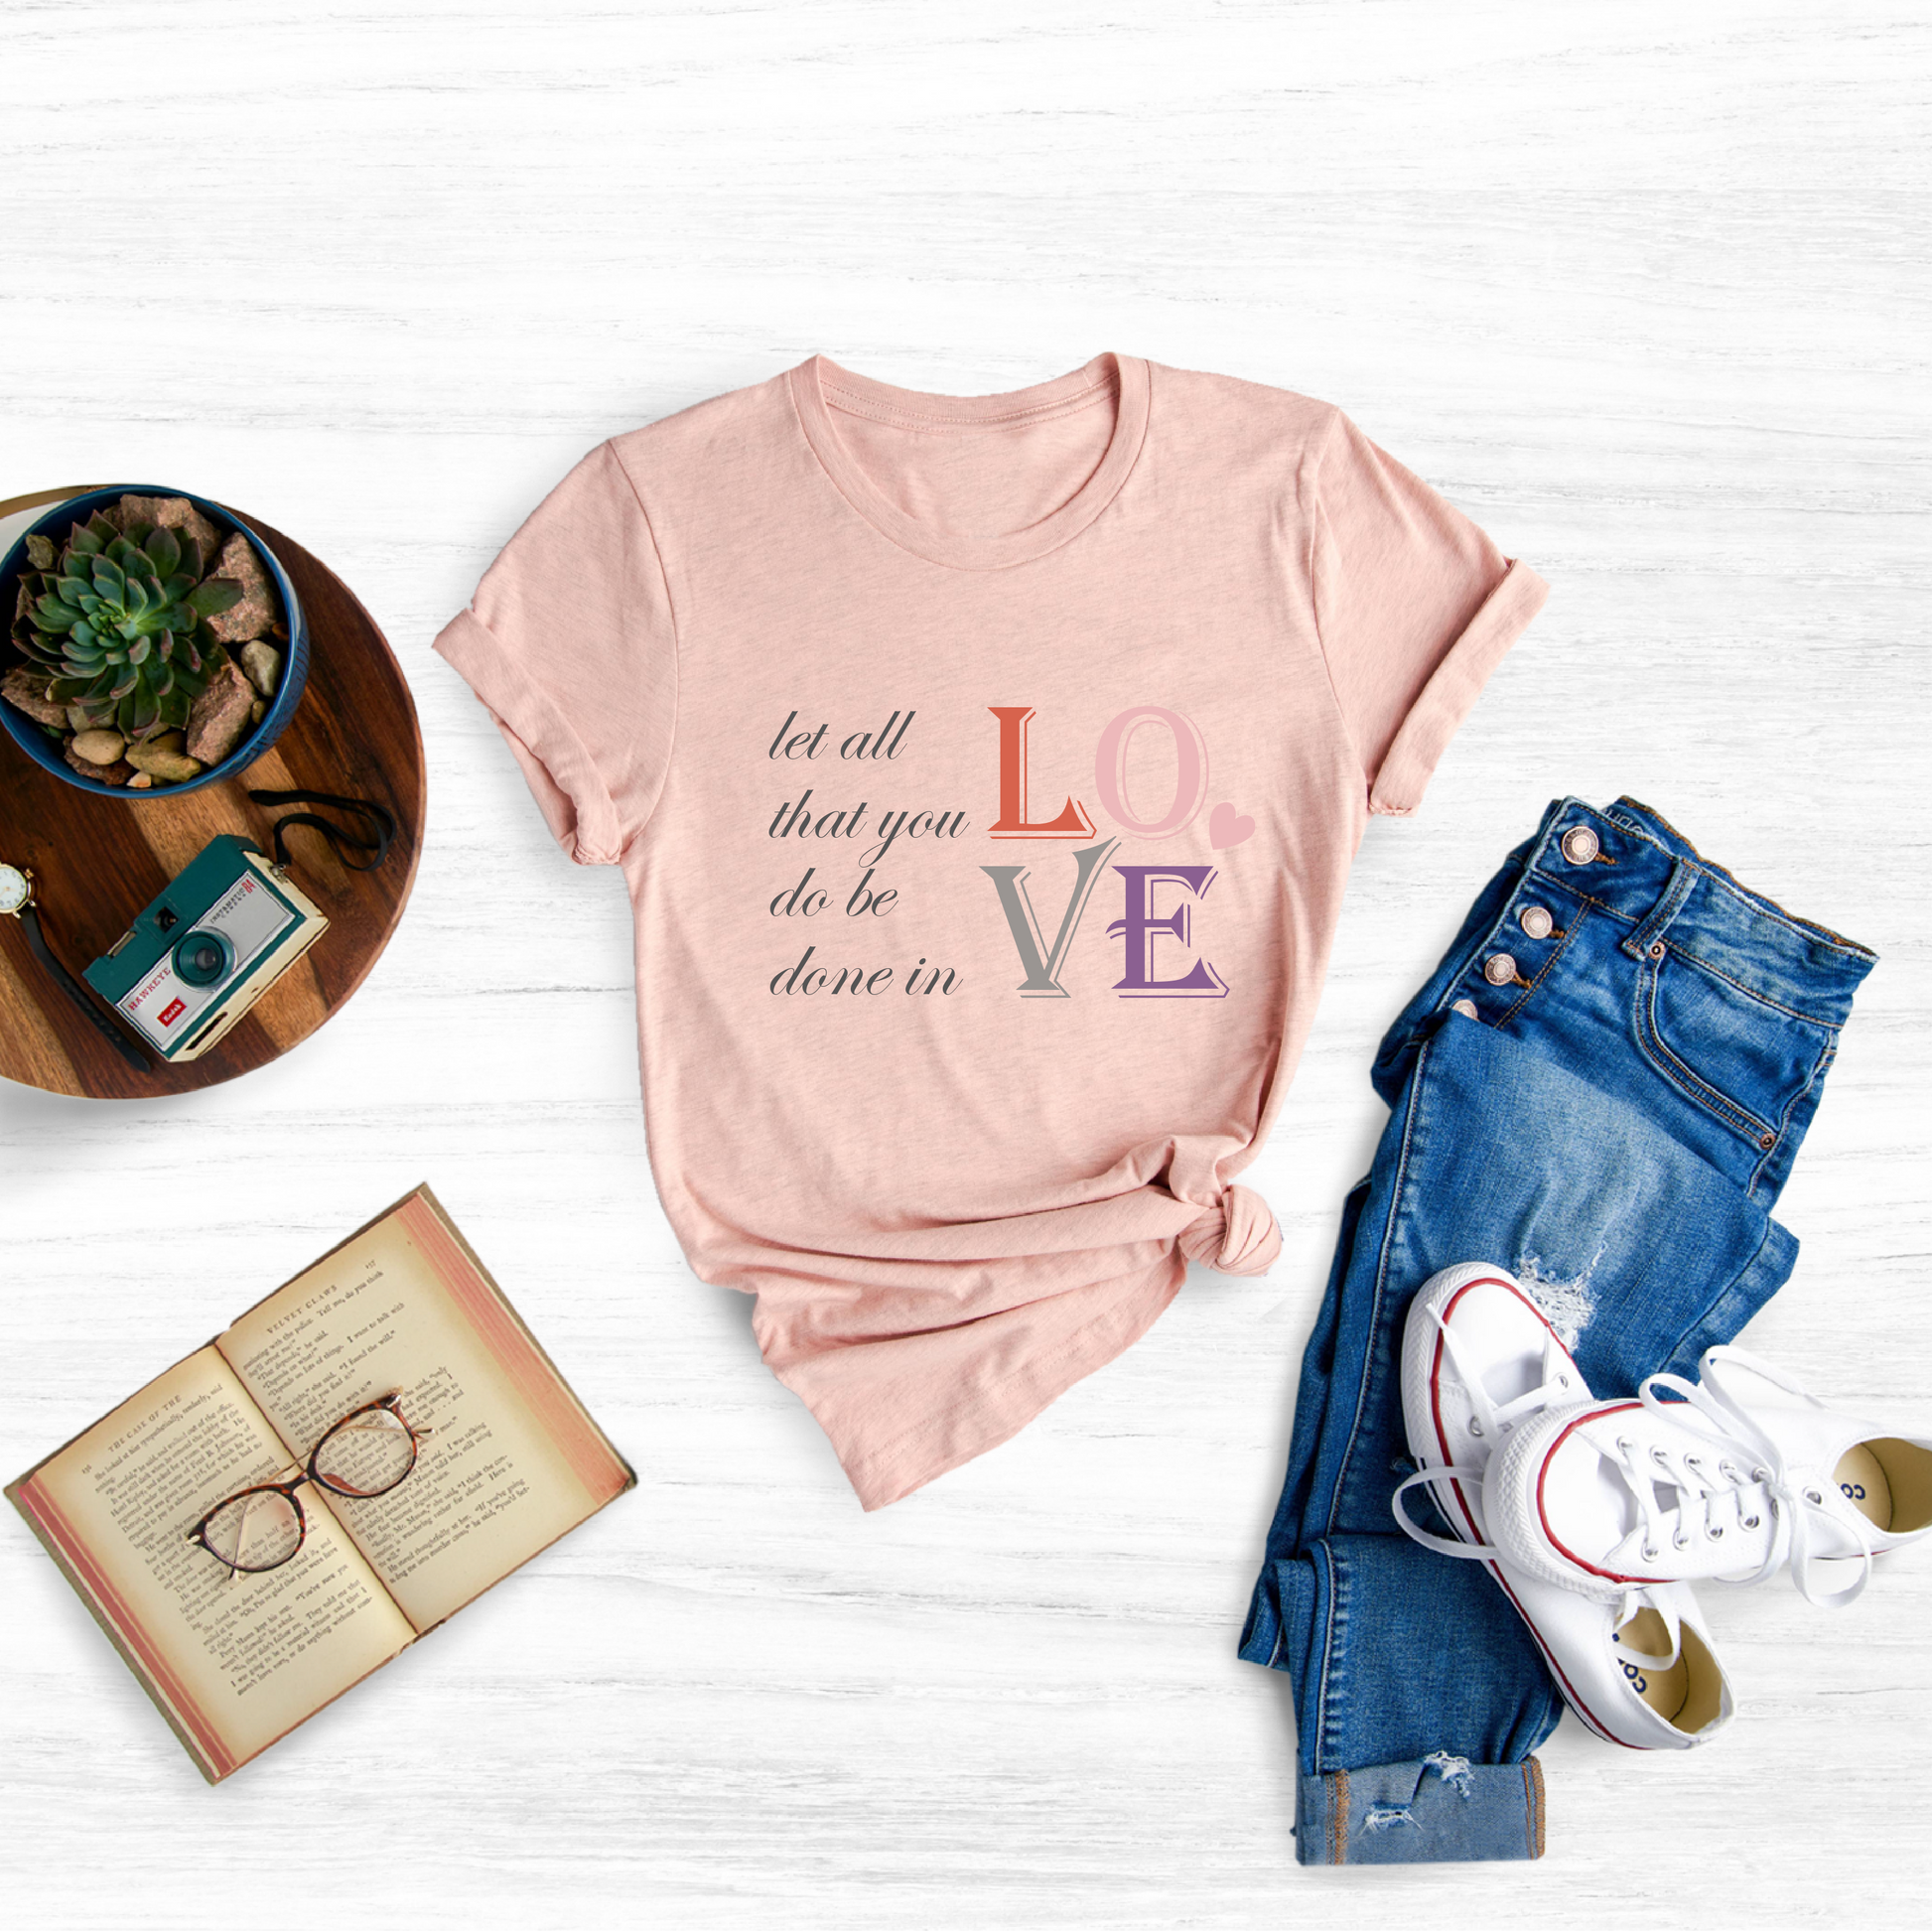 Show your love this Valentine's Day with this stylish and feminine graphic tee.